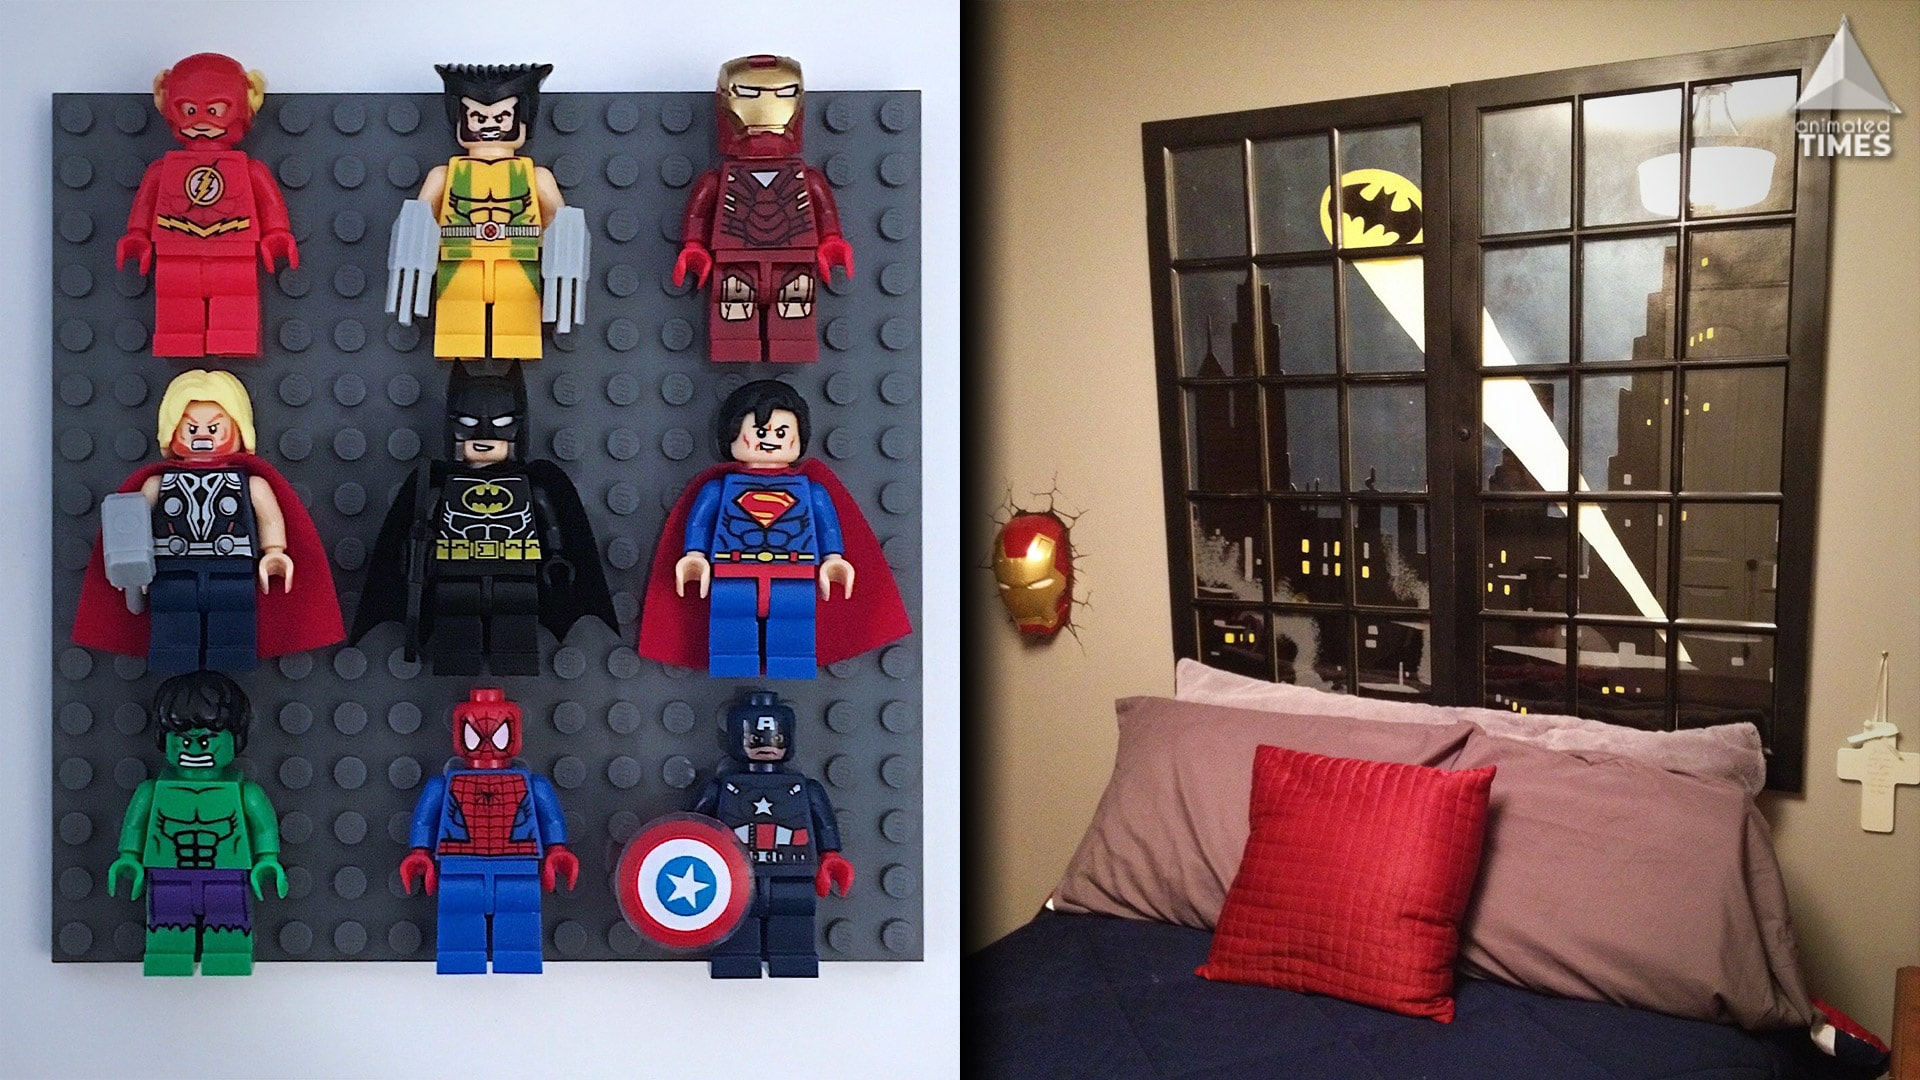 Superhero Designs: 10 Cool Ideas To Give Your Room A Brand New Look